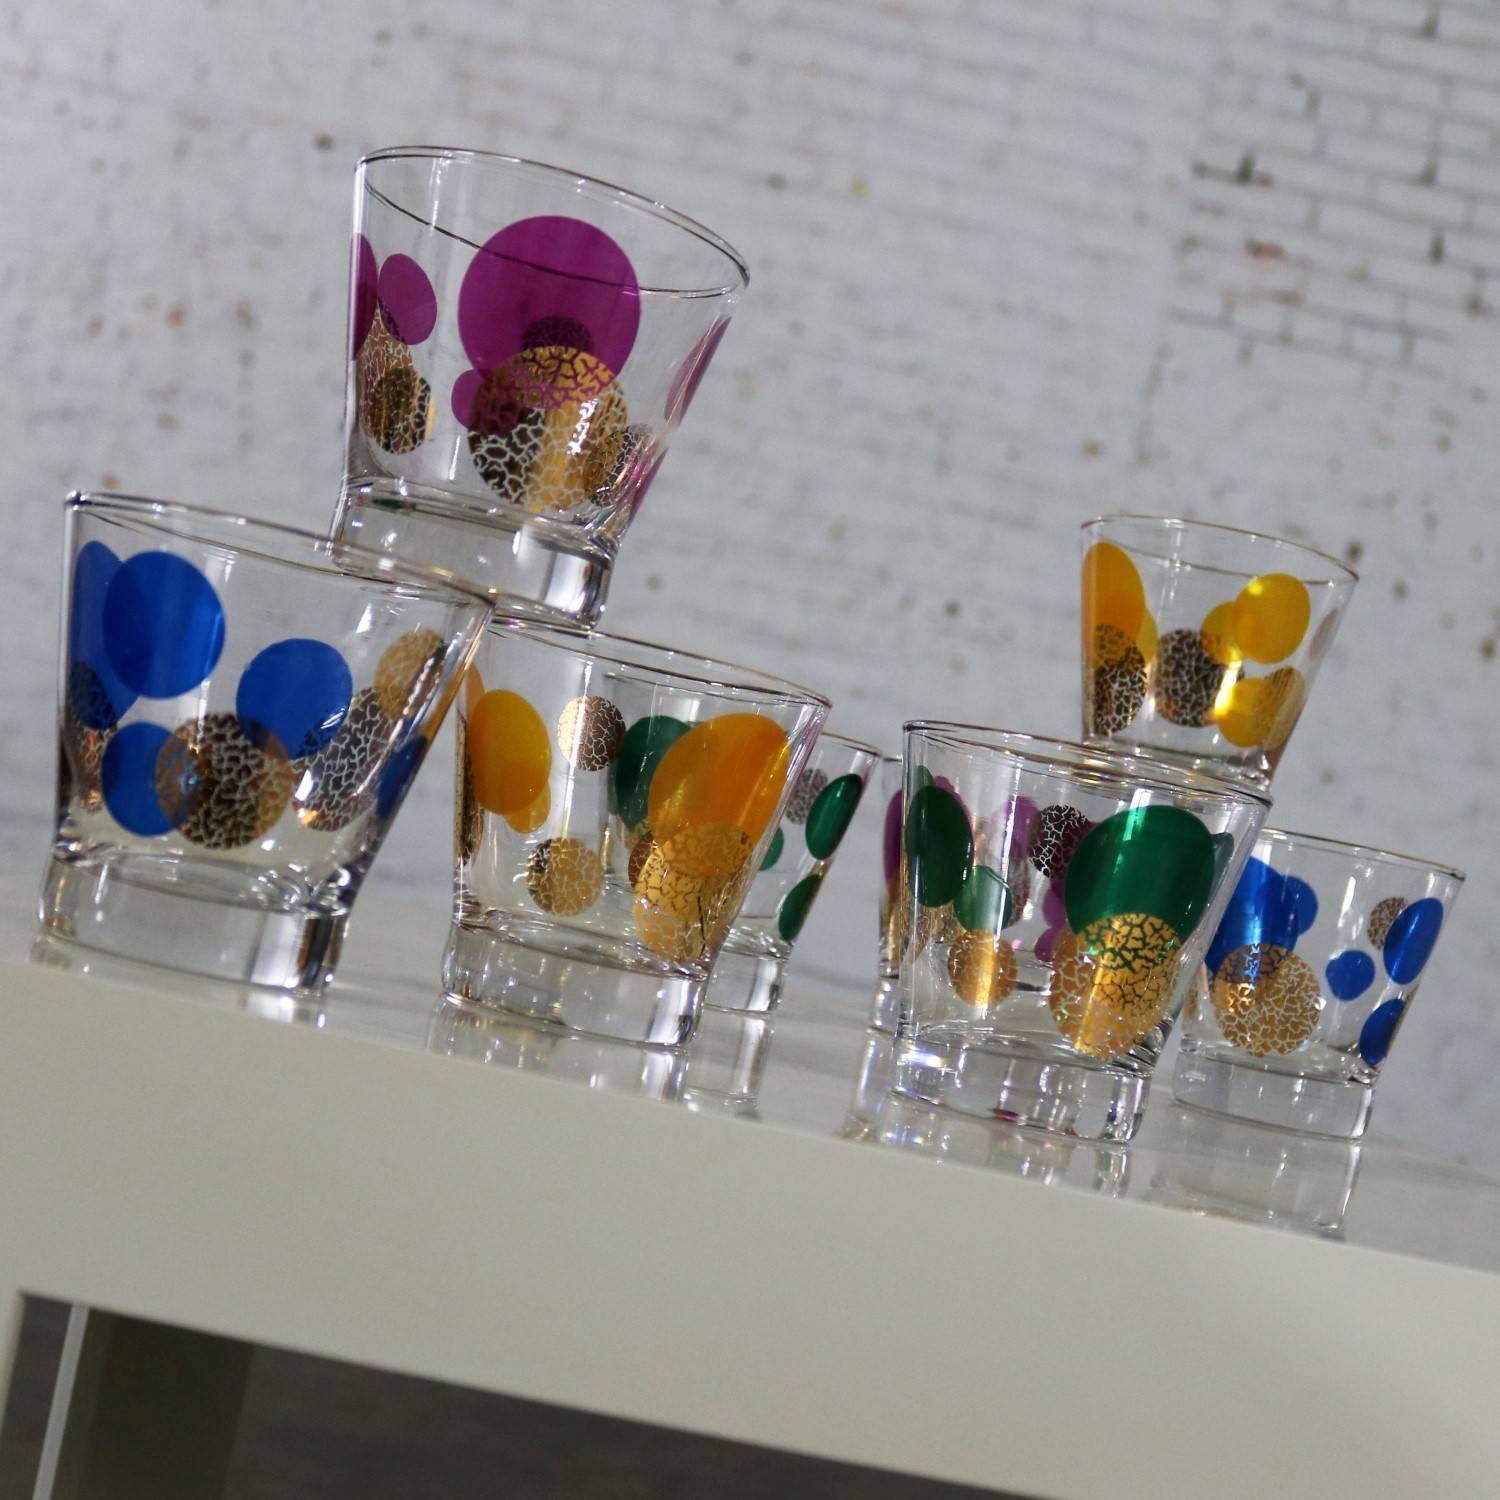 Wonderful set of eight Russel Wright designed Eclipse old fashioned cocktail glasses for Bartlett Collins. Two green, two oranges, two dark blue, and two magentas. These MCM glasses are in like-new condition with no chips, cracks, chiggers or loss